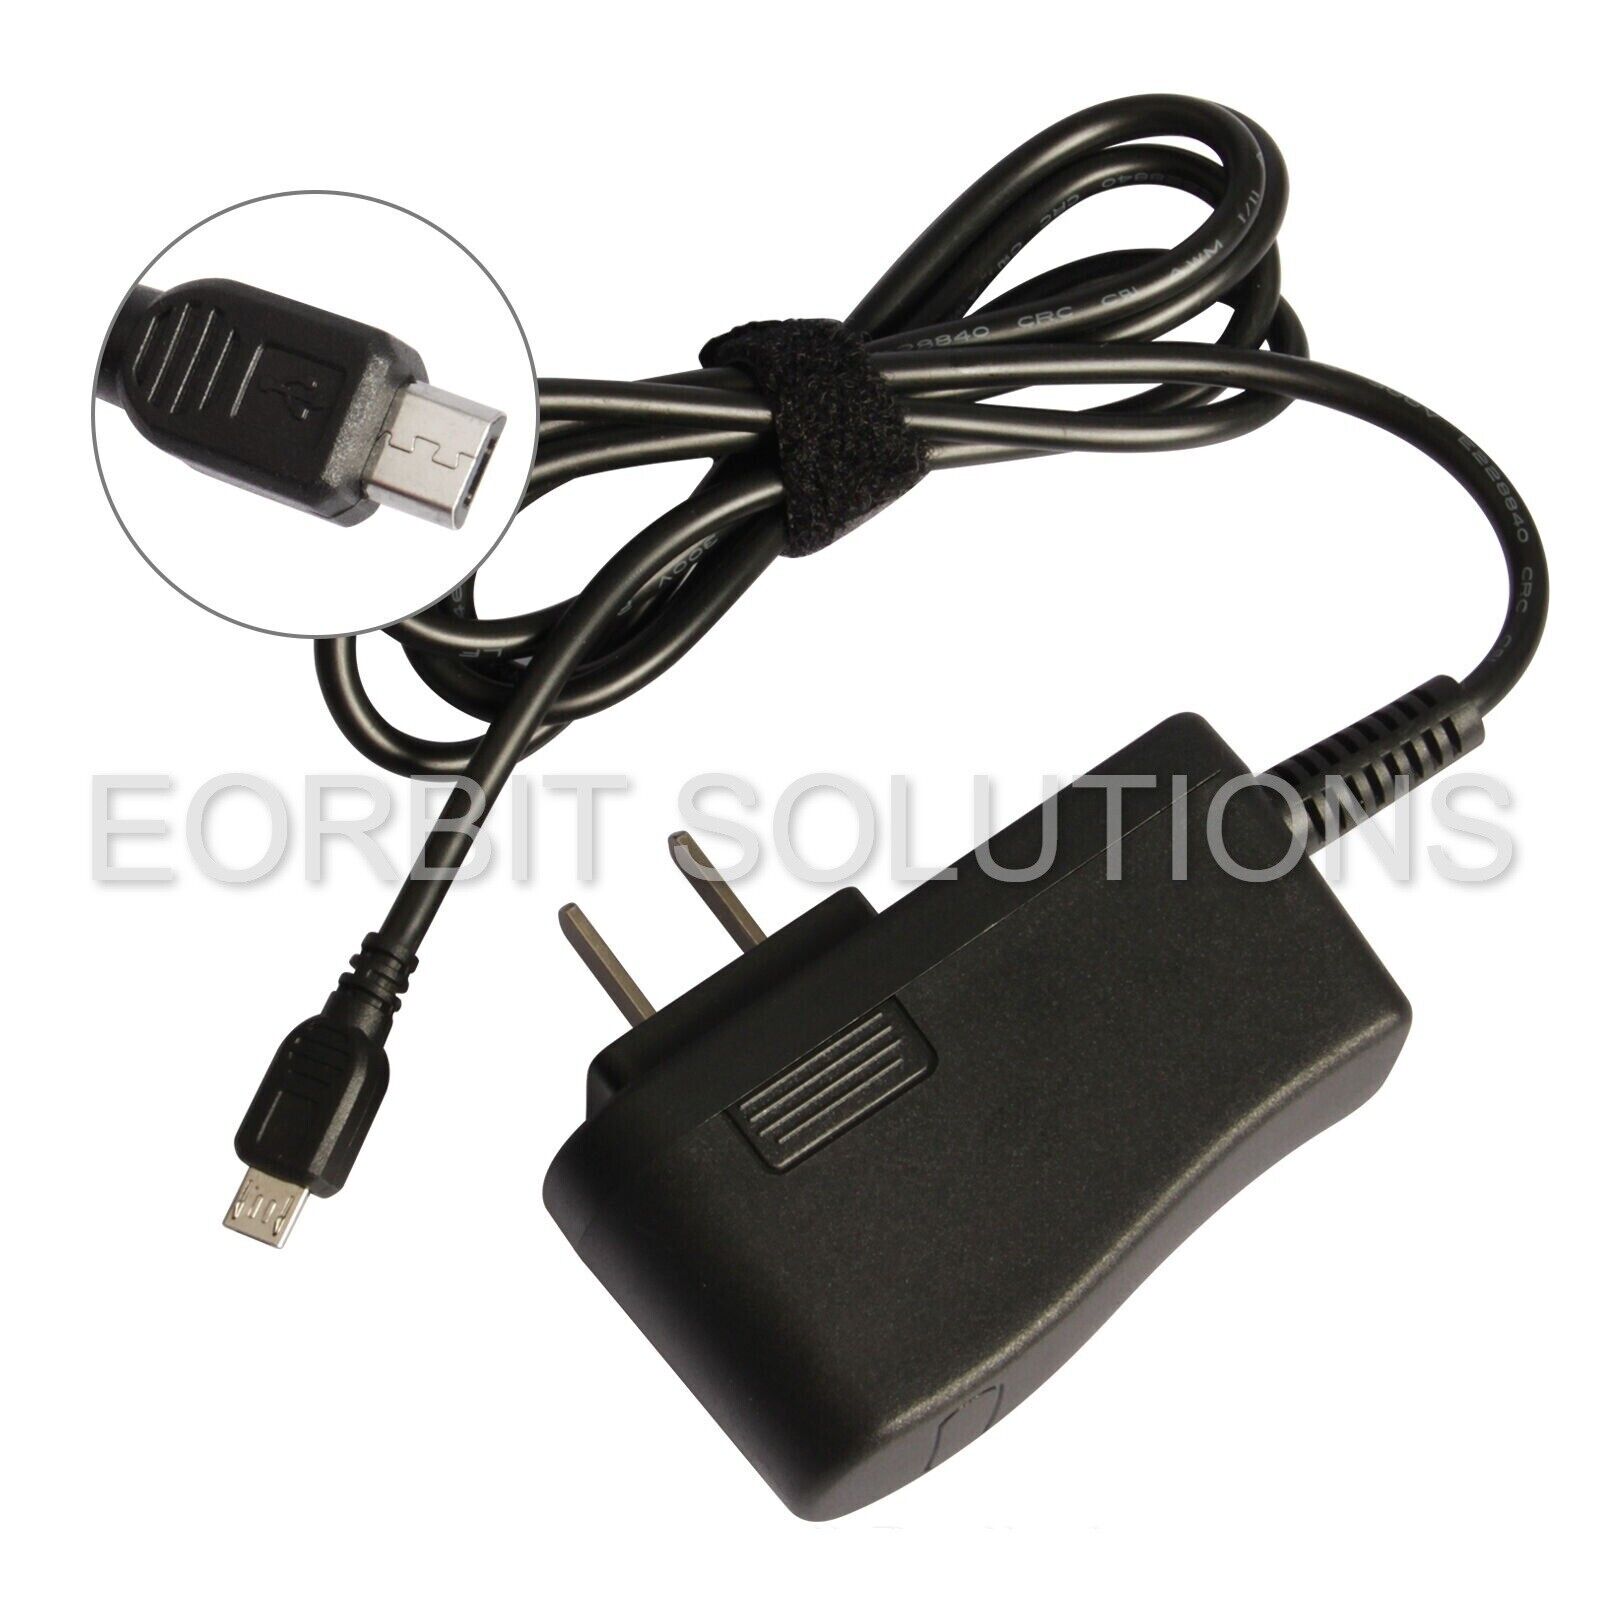 AC Adapter Charger Cord For Asus Transformer Book T100 T100TA T100TAF T100TAM Unbranded/Generic Does Not Apply